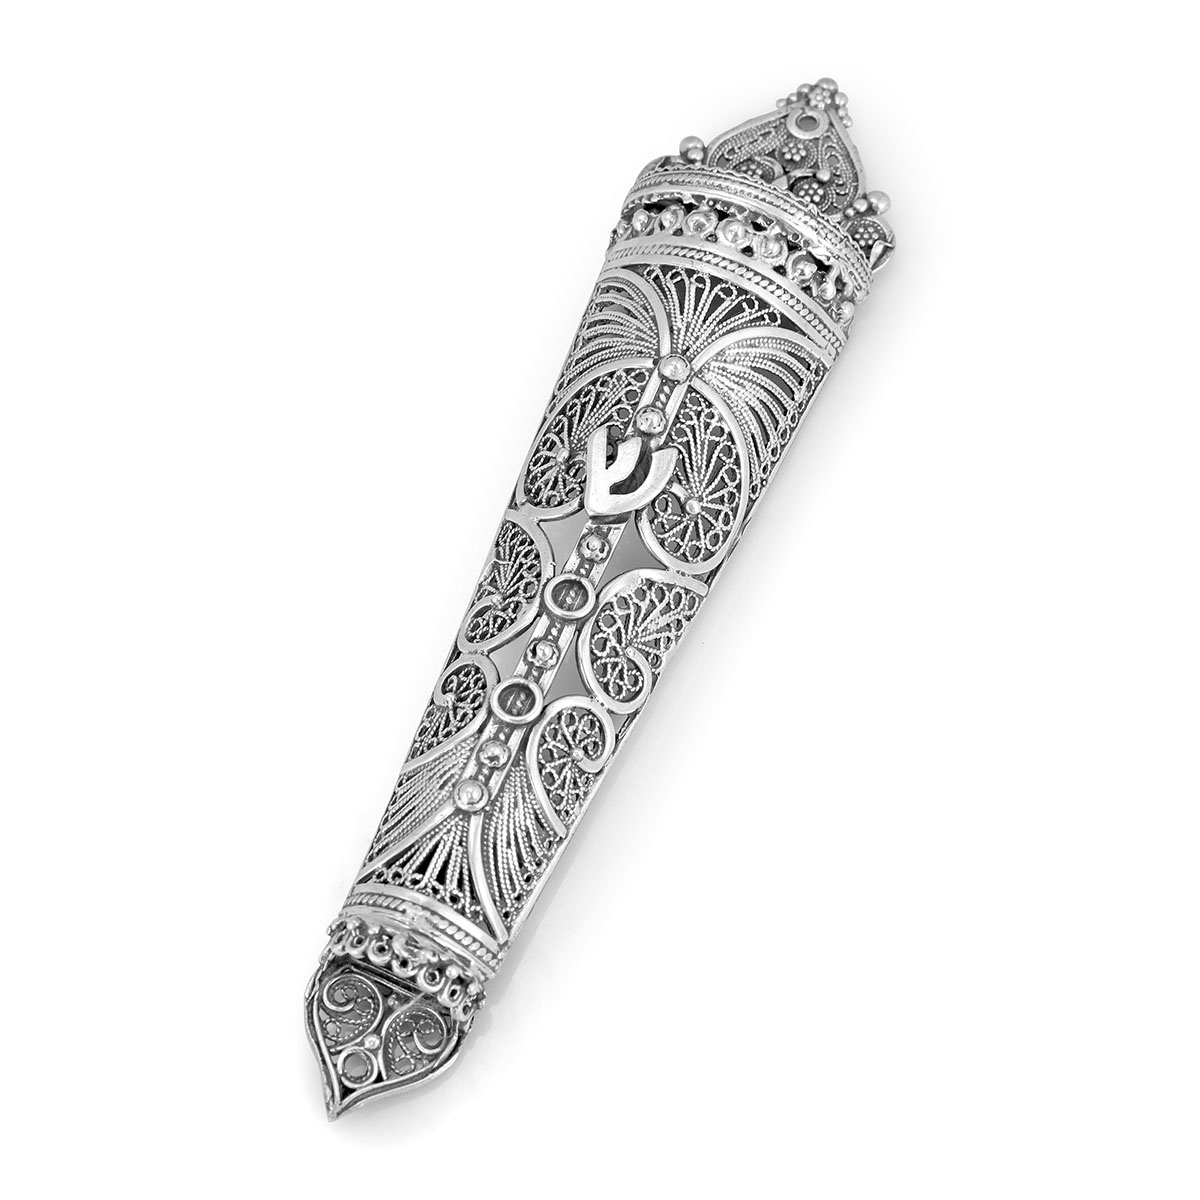 Traditional Yemenite Art Handcrafted Sterling Silver Mezuzah Case With Filigree Design - 1